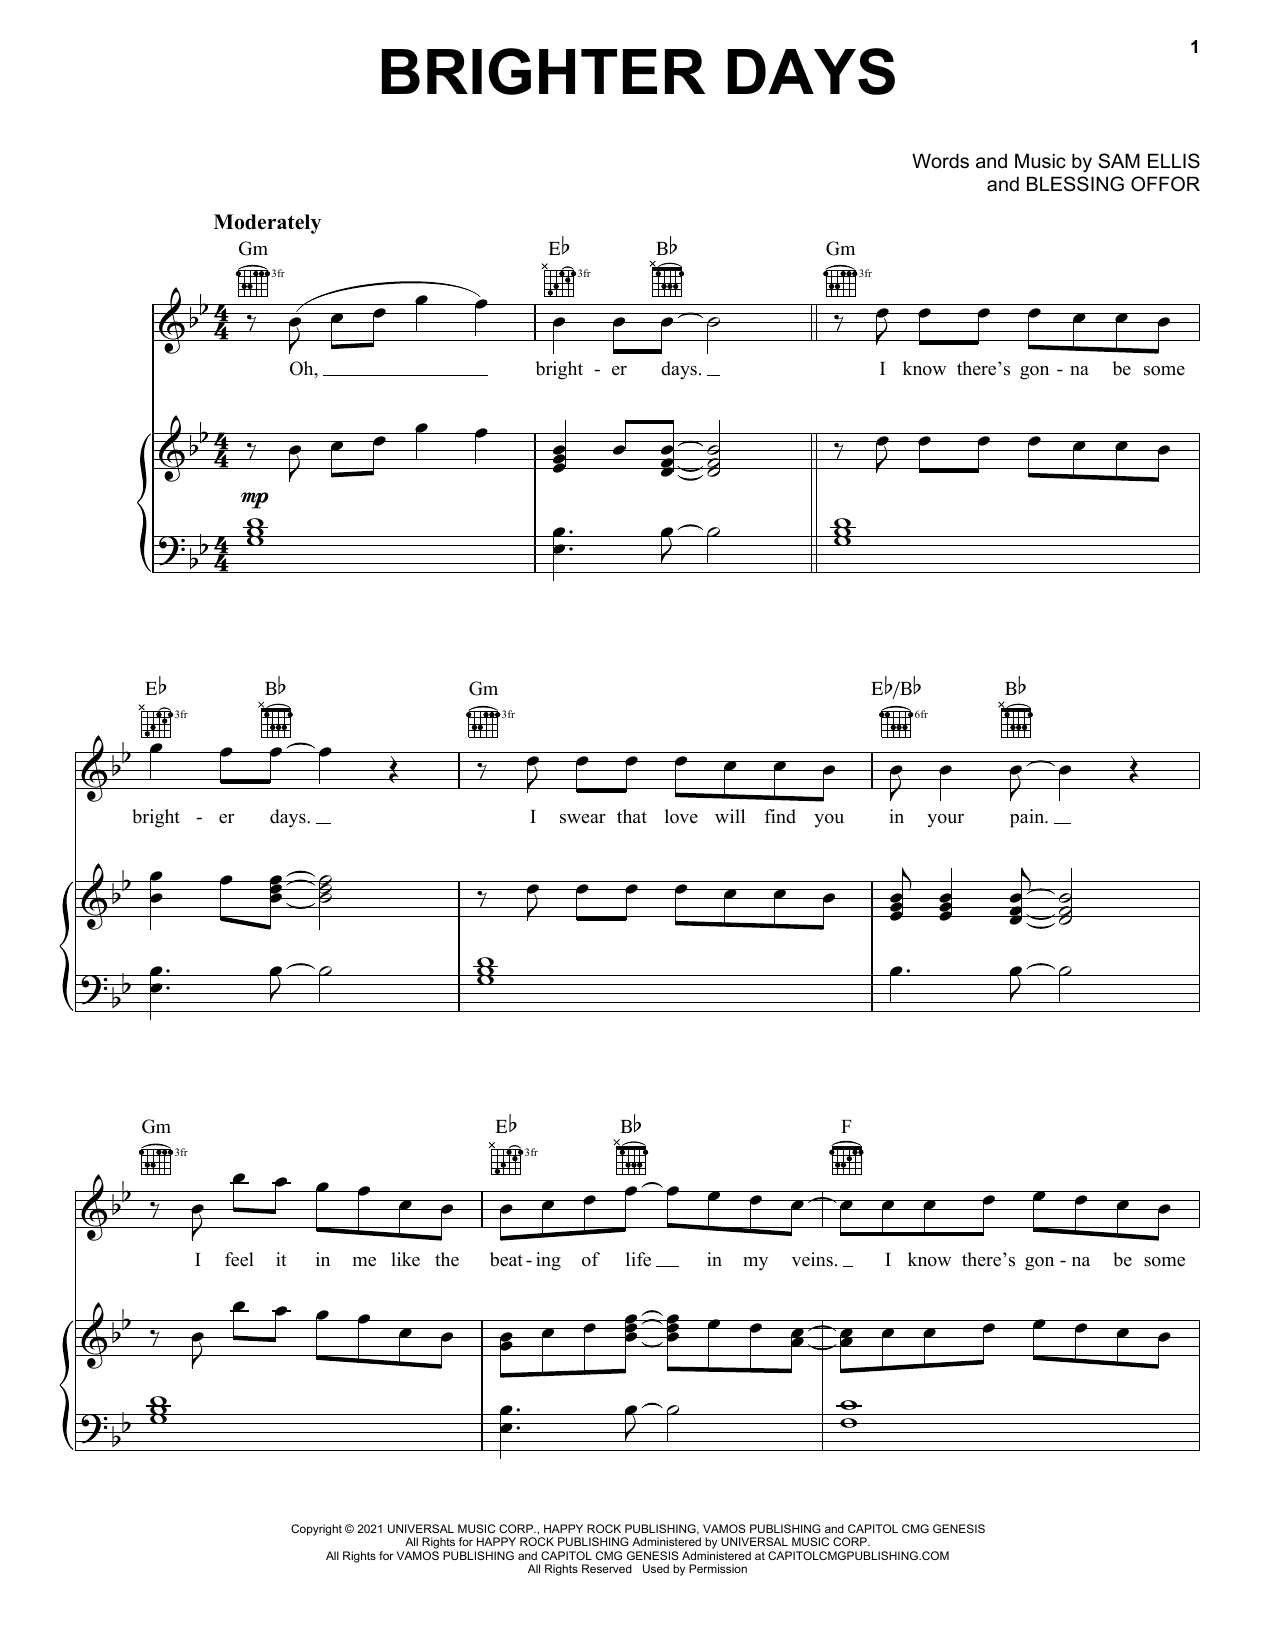 Blessing Offor Brighter Days sheet music notes and chords. Download Printable PDF.